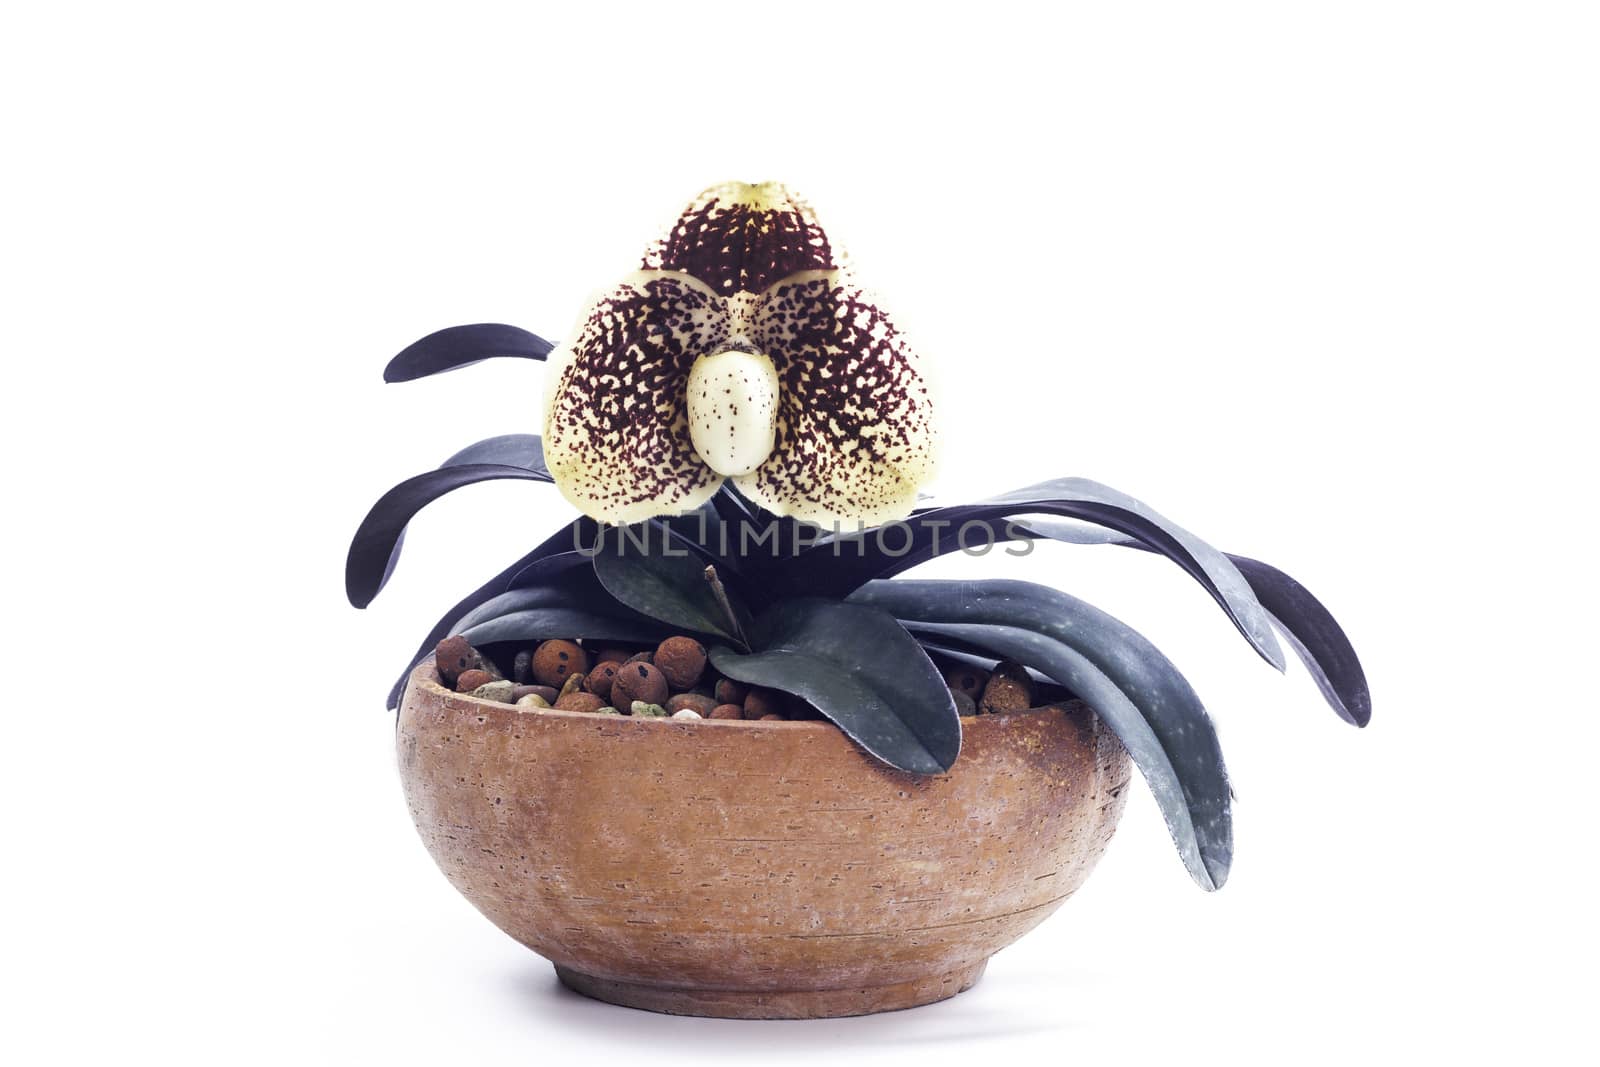 Paphiopedilum orchids flower. by jee1999